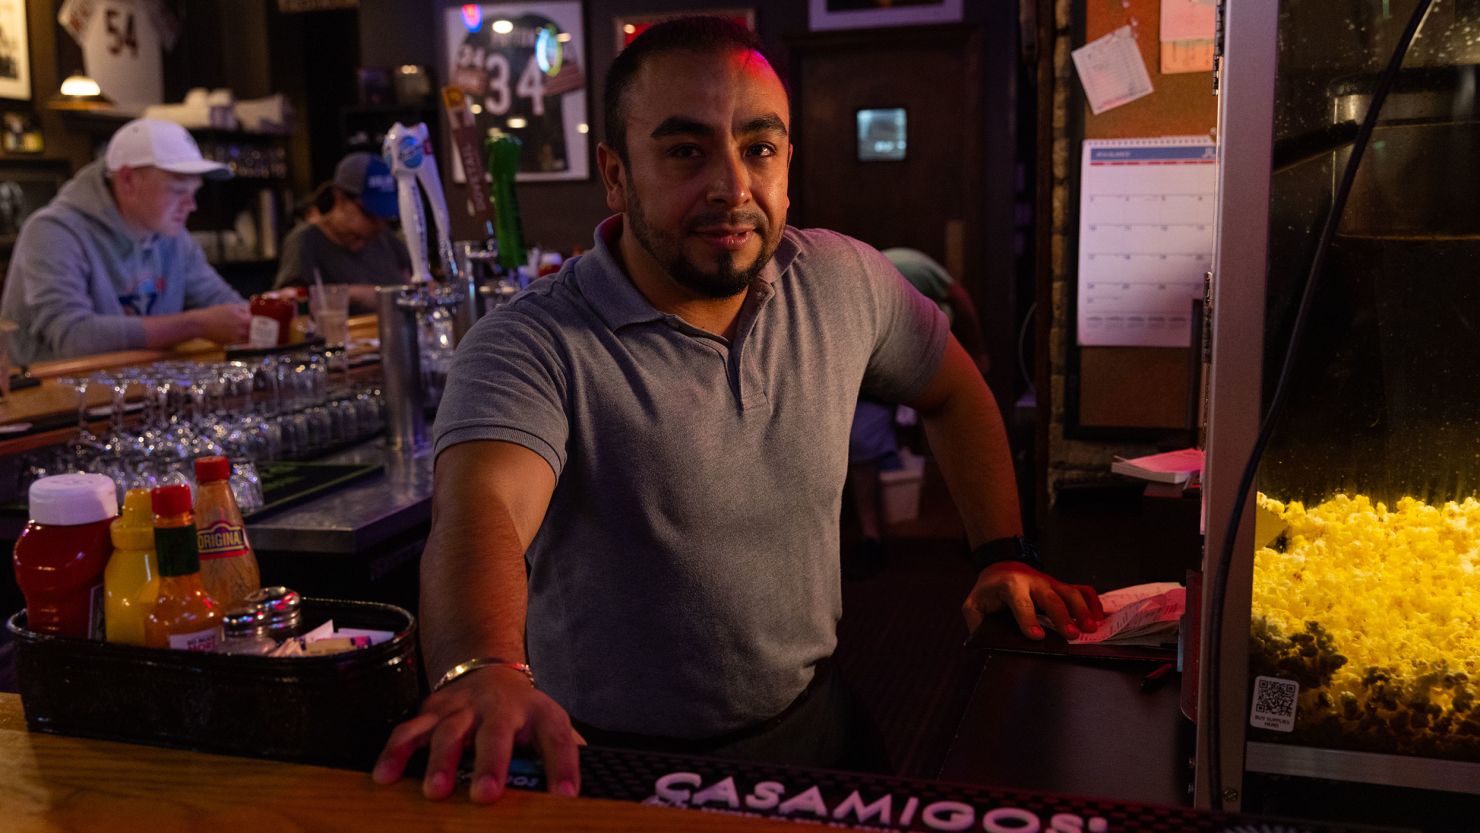 Israel Velez works the bar at Norton's Restaurant the day after learning his friend and longtime regular Stephen Straus was killed.